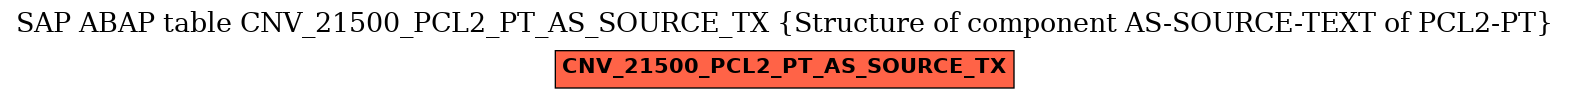 E-R Diagram for table CNV_21500_PCL2_PT_AS_SOURCE_TX (Structure of component AS-SOURCE-TEXT of PCL2-PT)